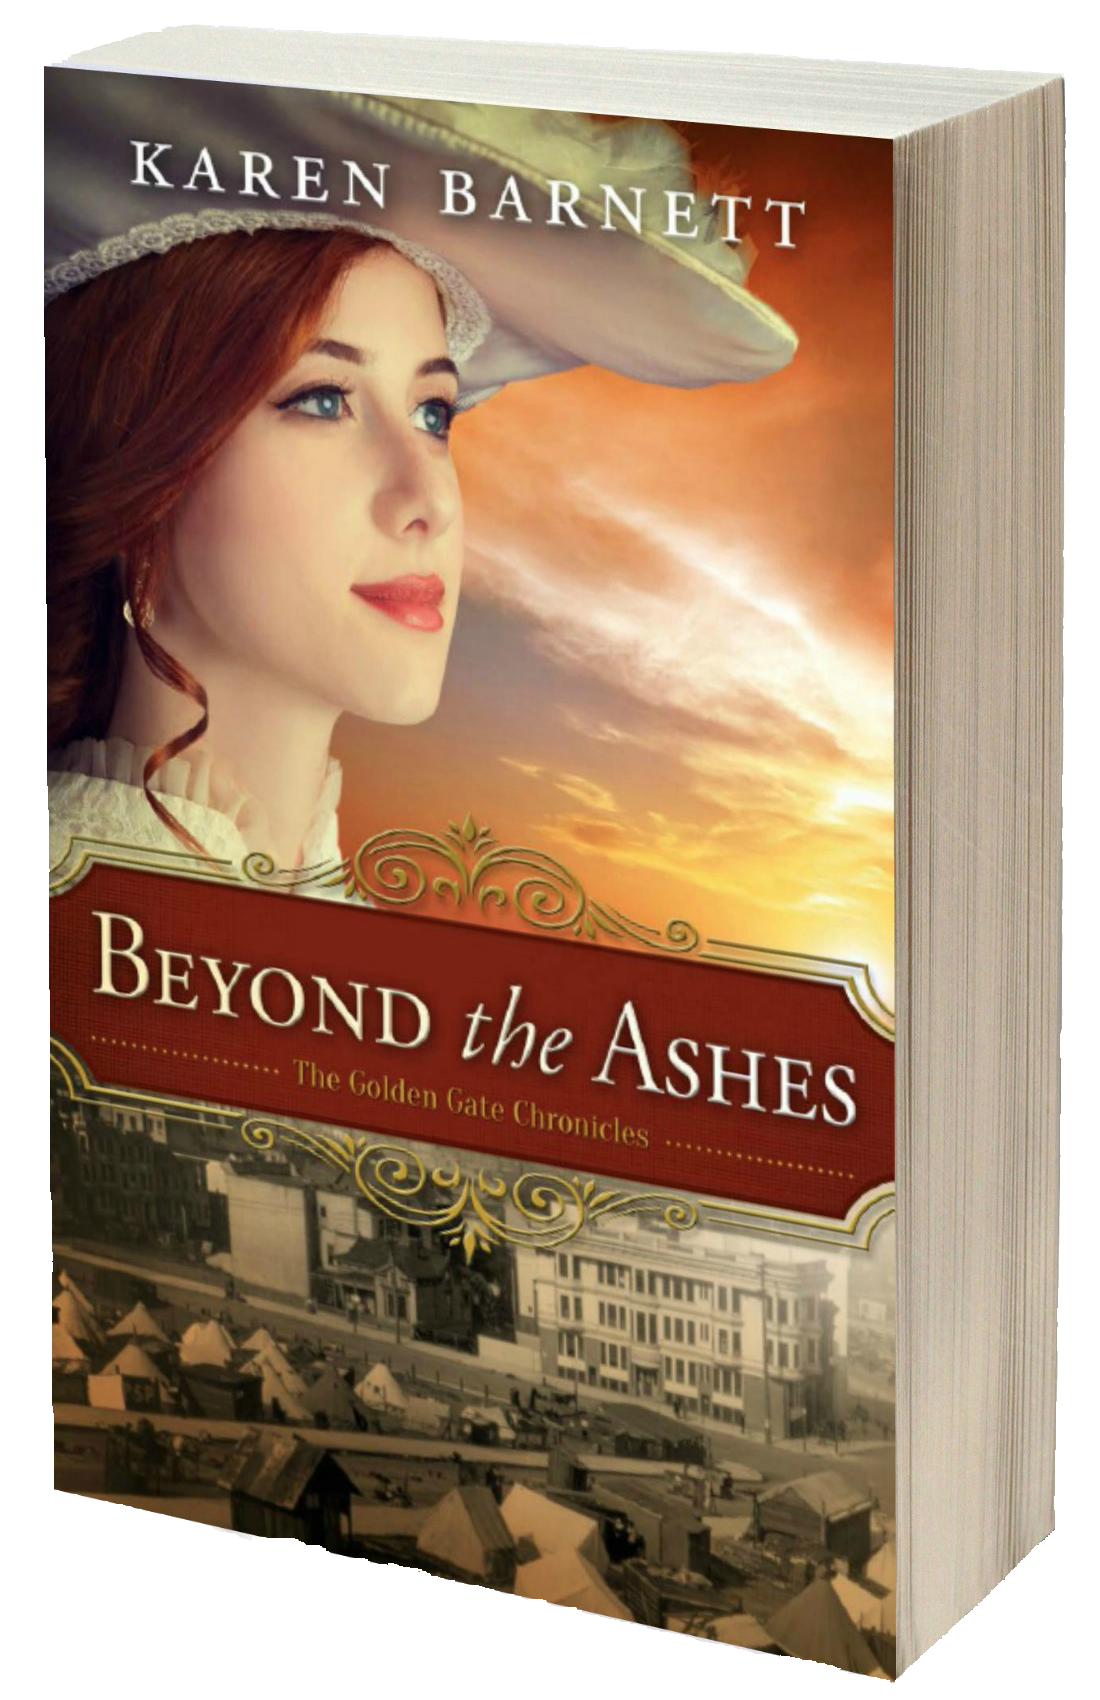 Win an Early Copy of Beyond the Ashes!